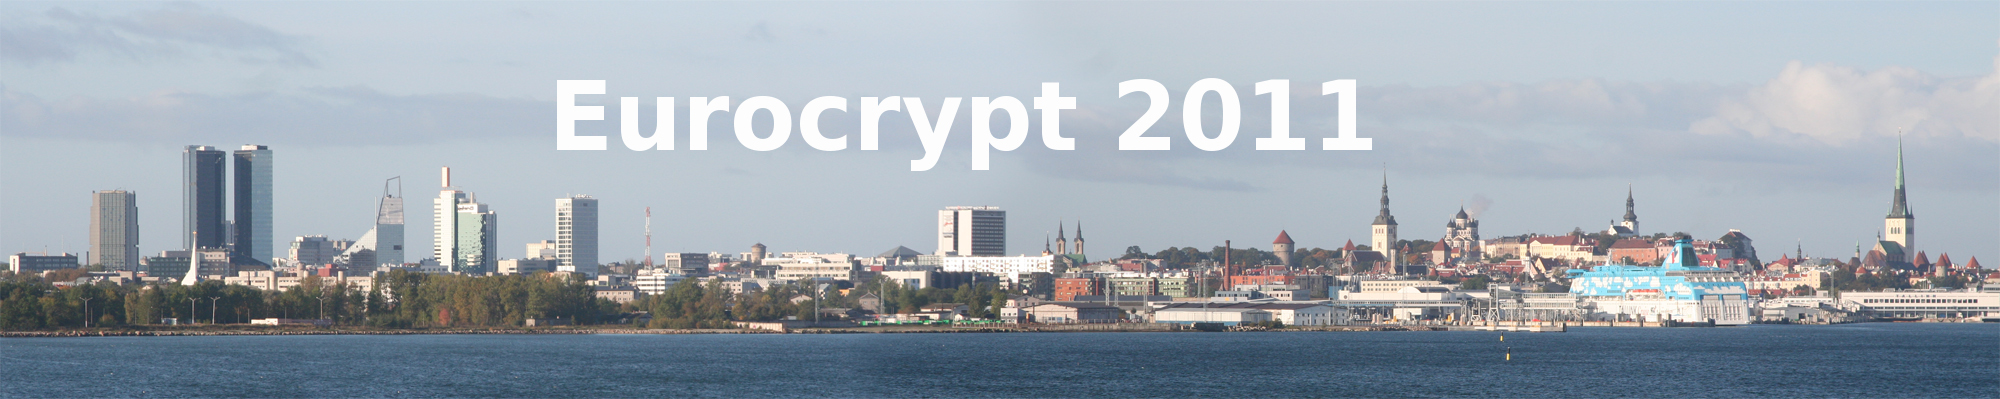 ../../../../media/nds/attachments/images/2011/05/eurocrypt2011.jpg